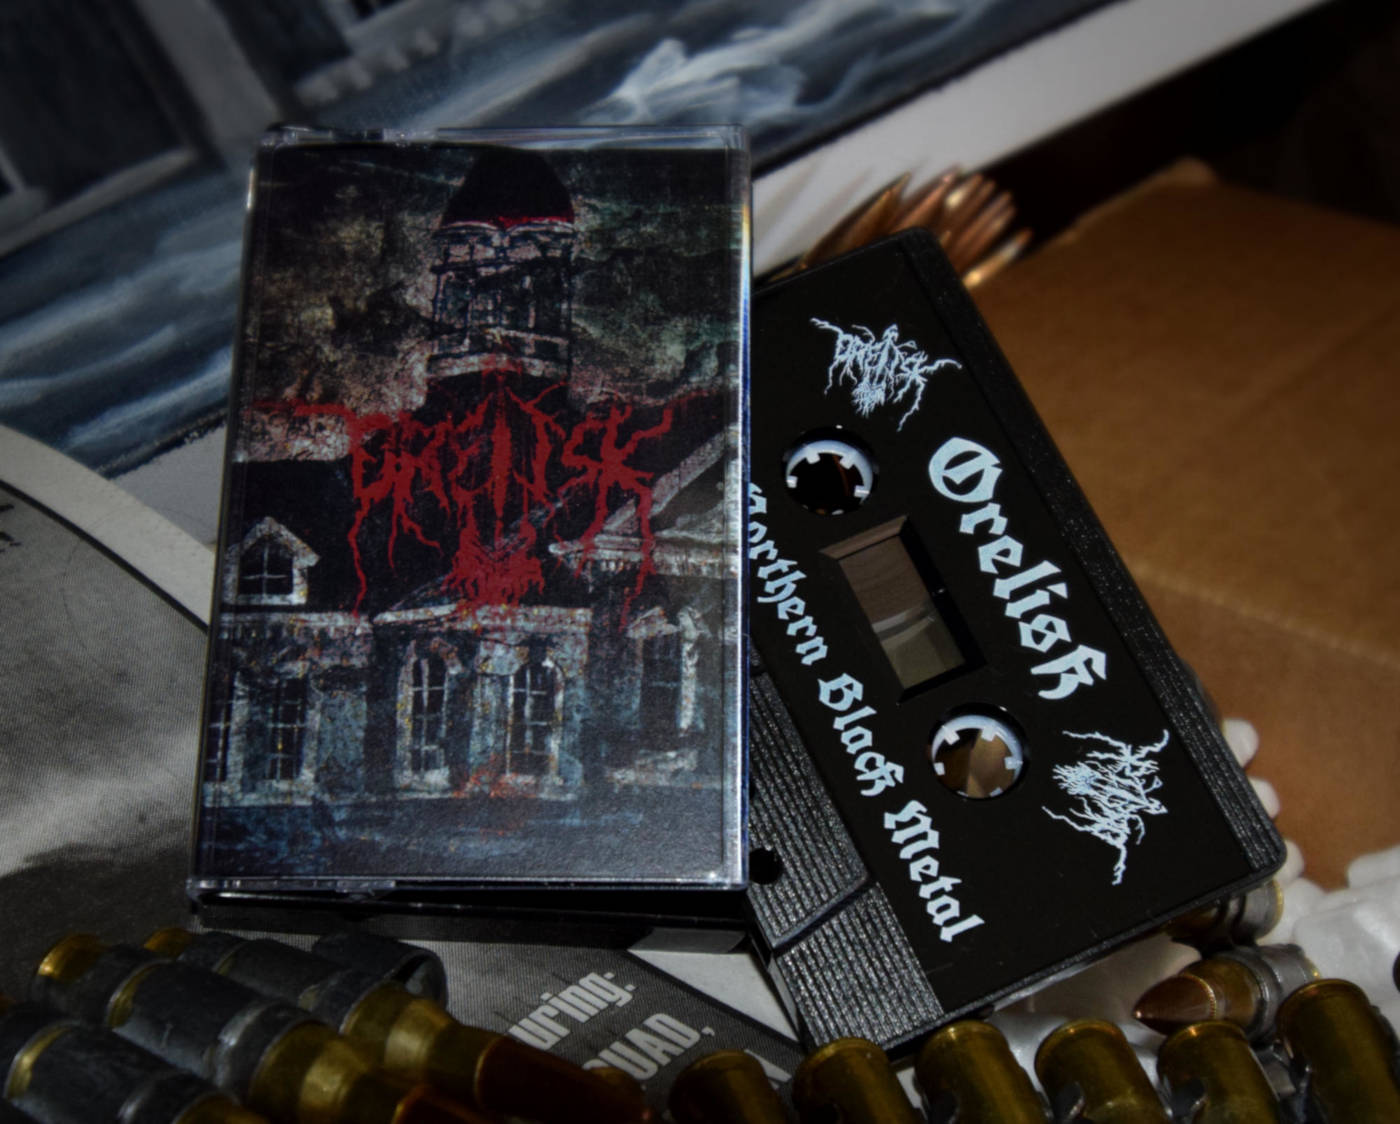 Band brand logo for Orelisk in blood red with dark surreal background on cassette tape. Logo and editing by Korpi.